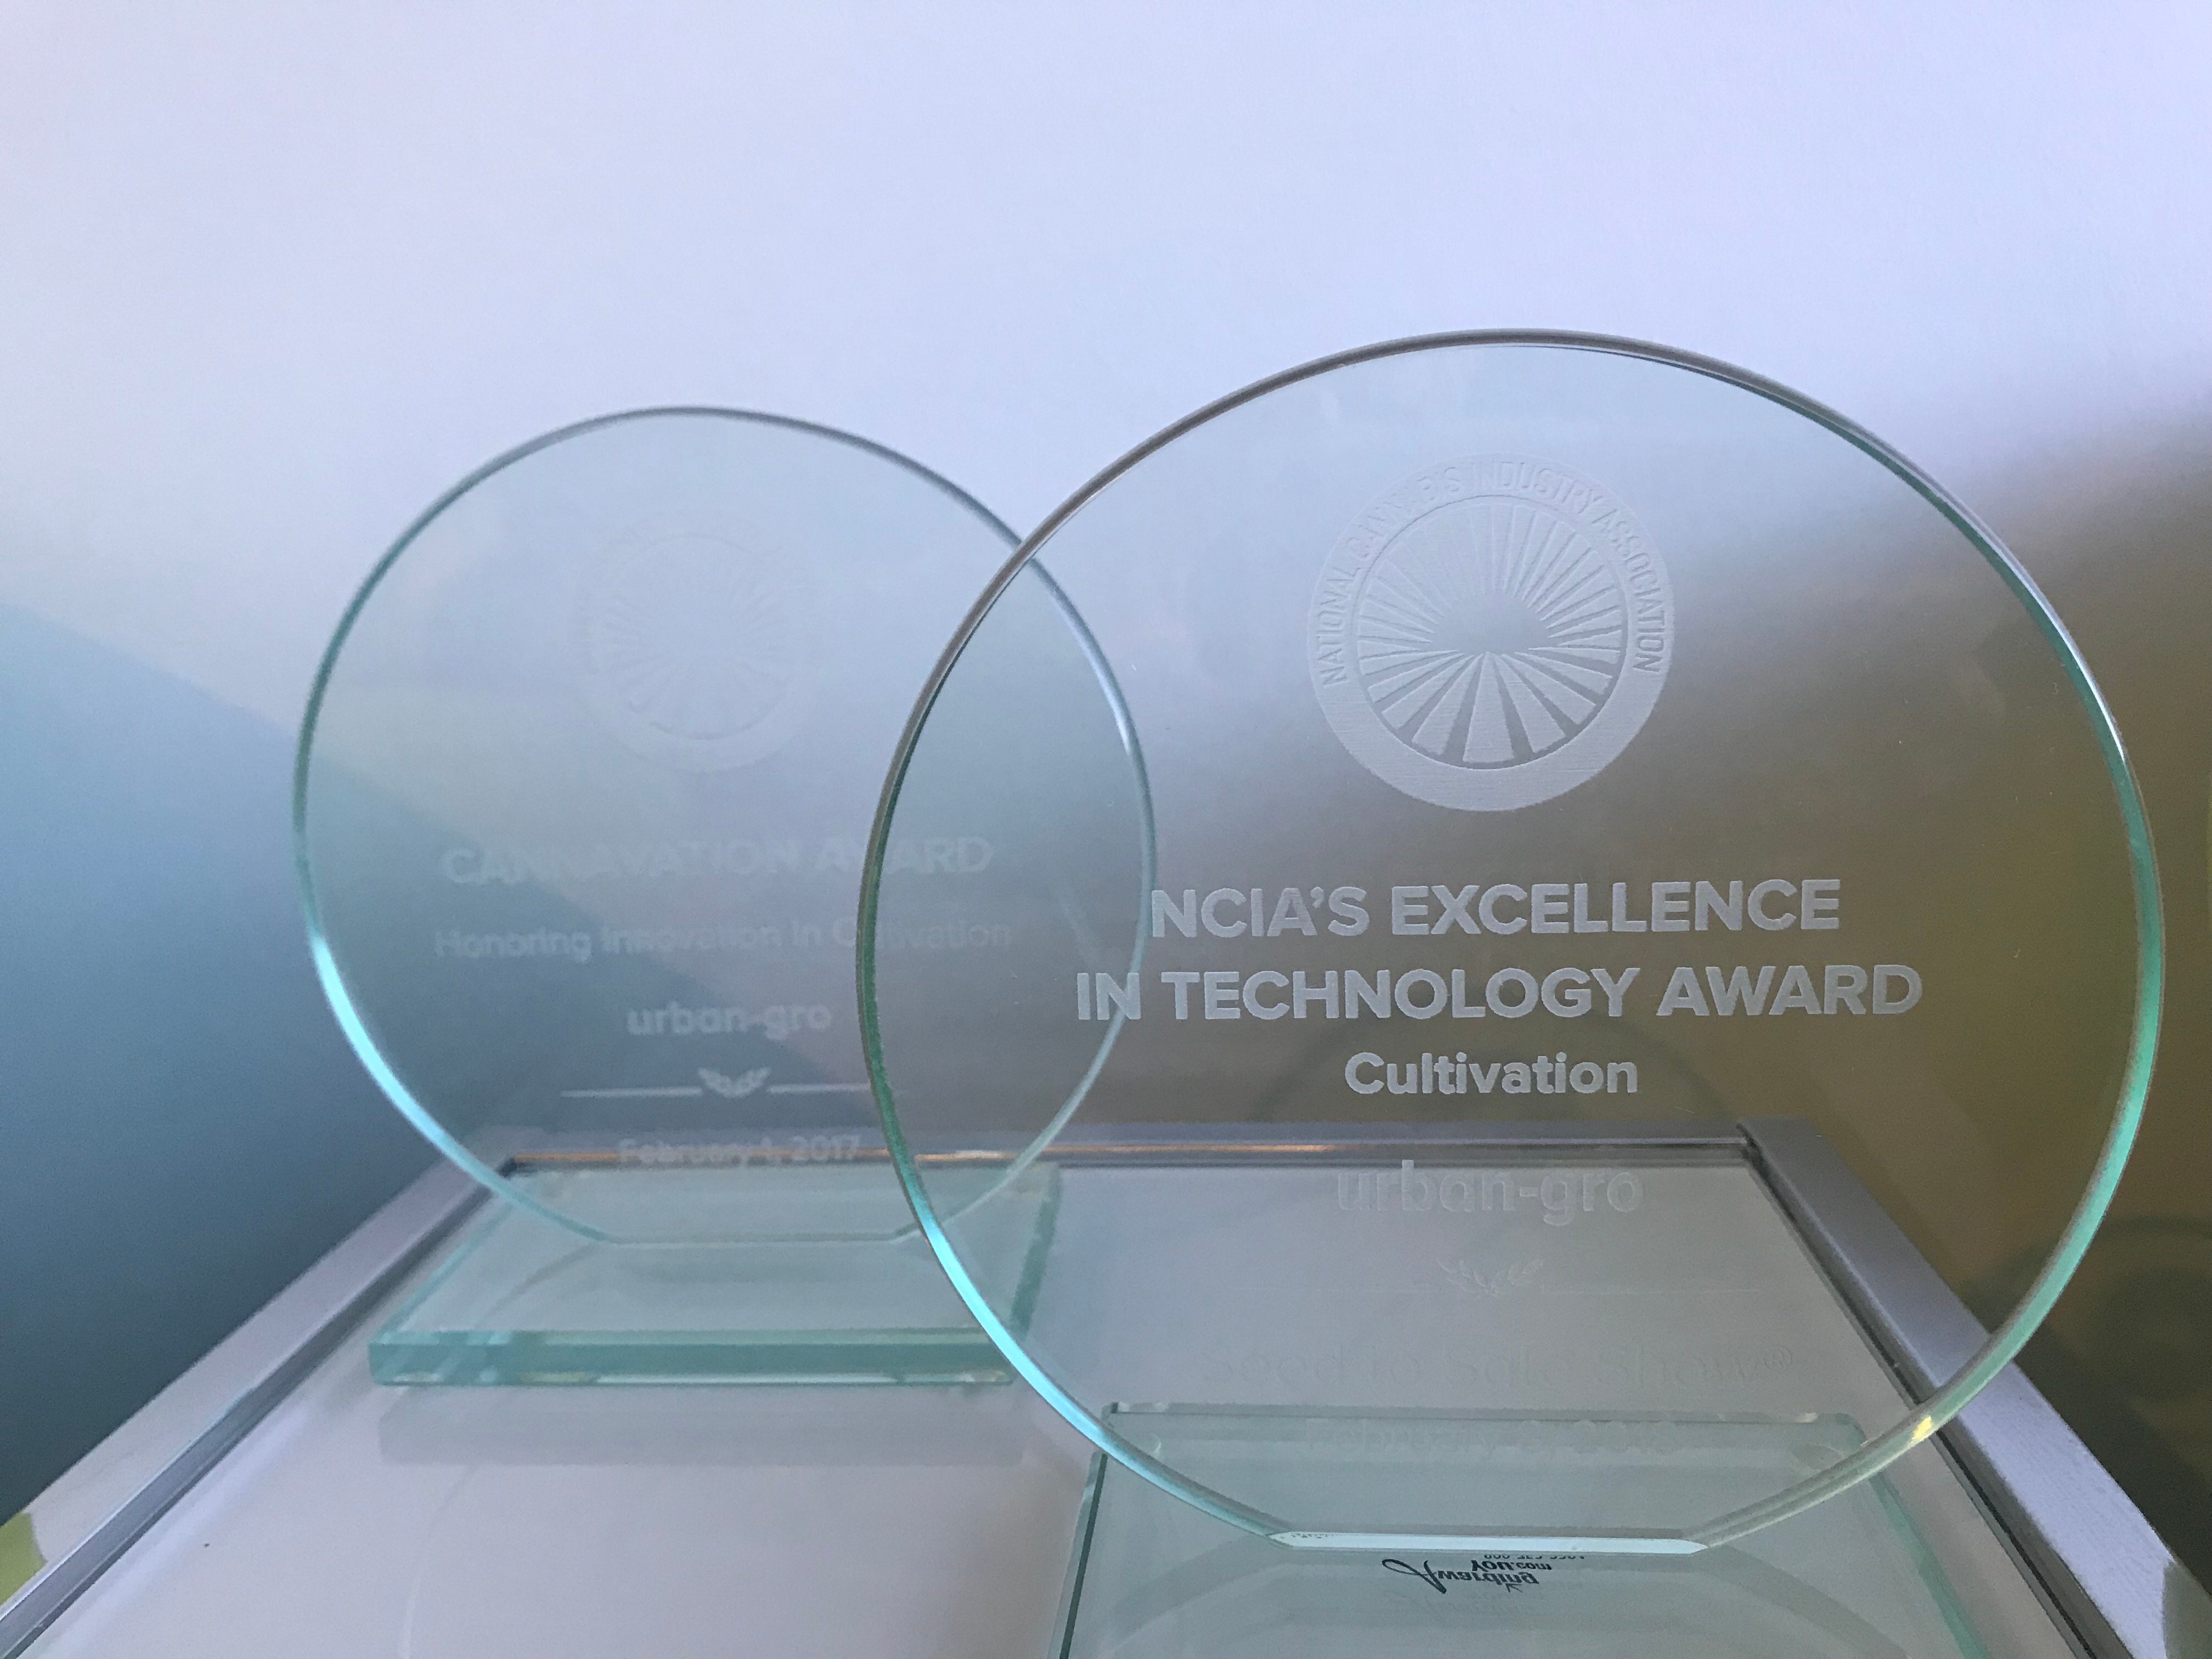 Excellence in Innovation – Cultivation (February 2019)  NCIA’s Third Annual Cannavation and Cannatech Awards